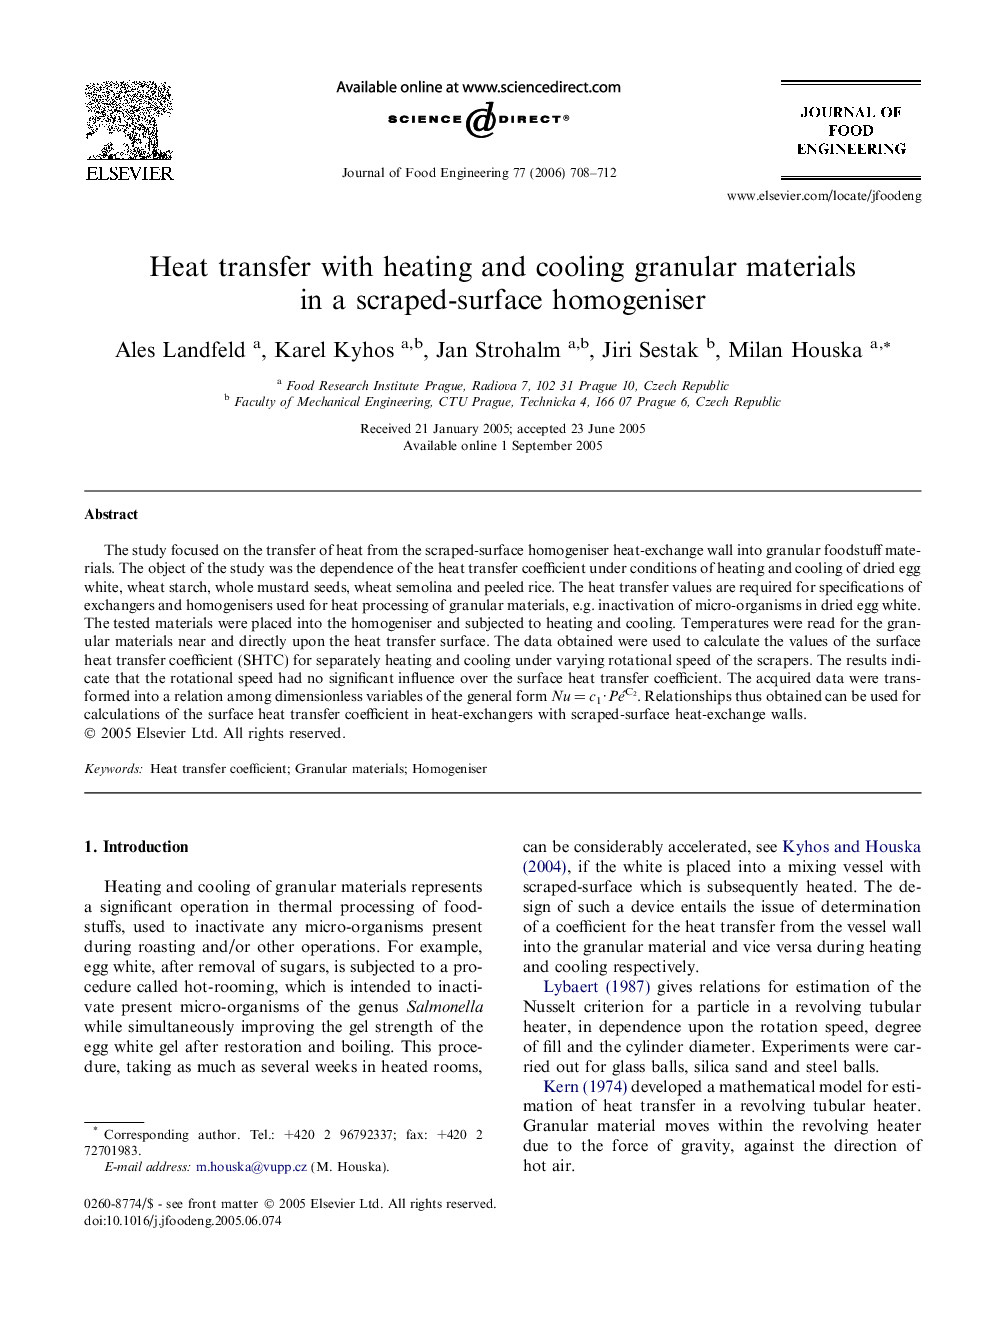 Heat transfer with heating and cooling granular materials in a scraped-surface homogeniser